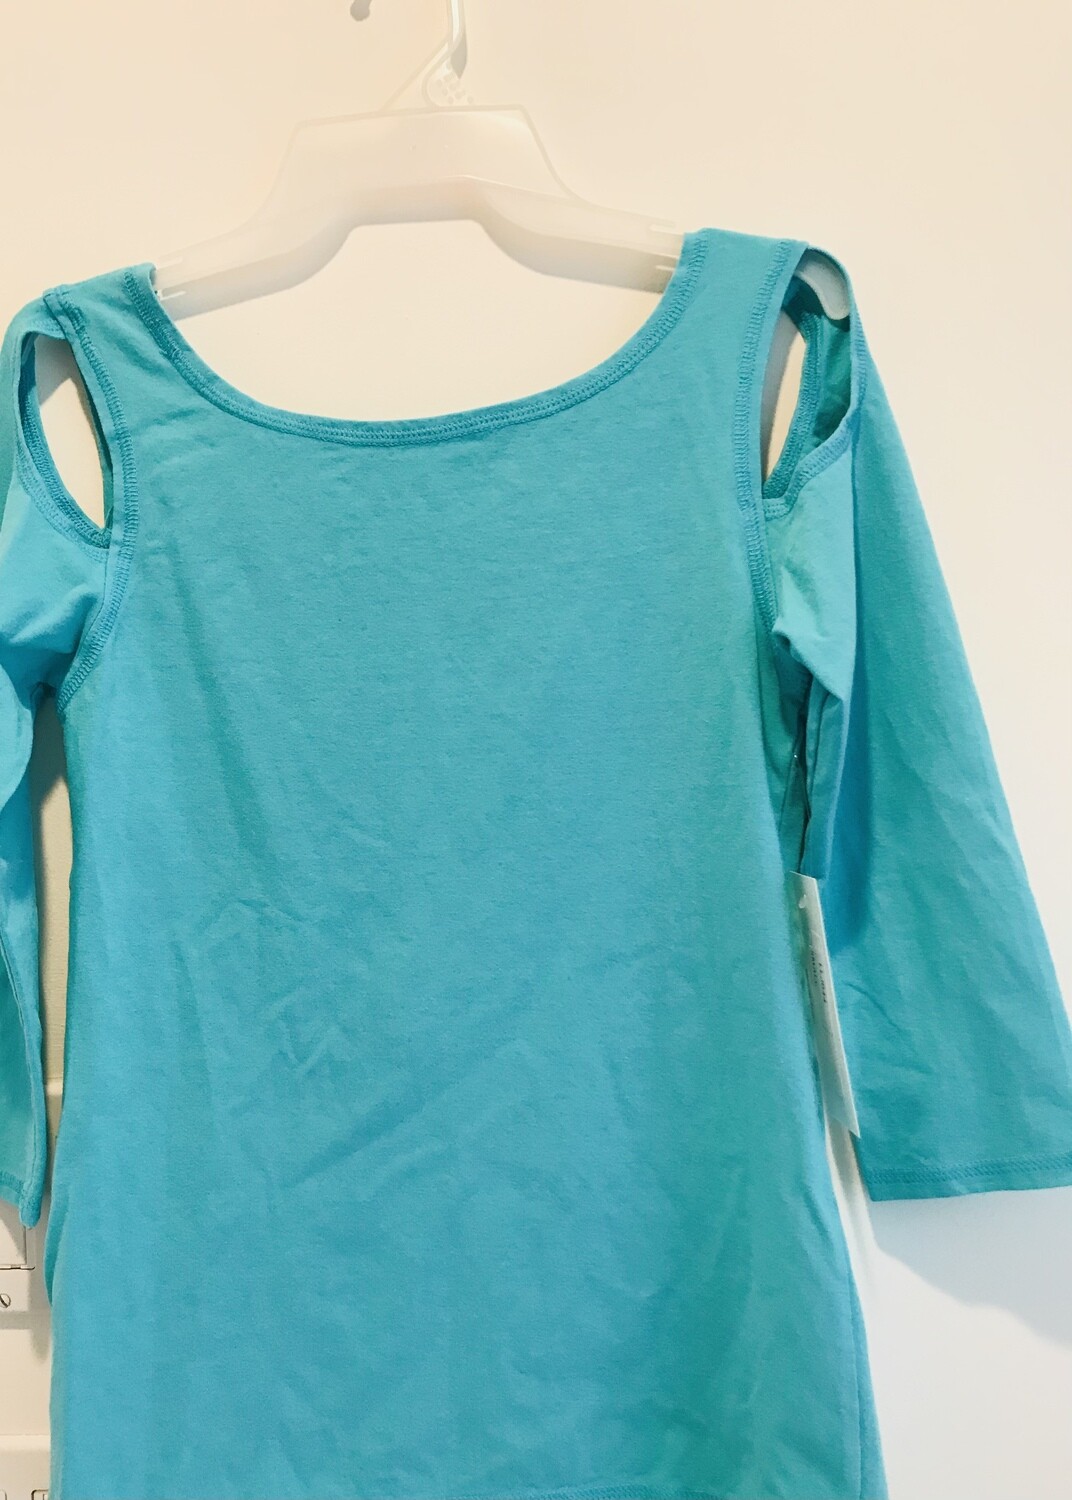 Luna Luz: Three-Quarter Open Sleeve Cotton Top (Ships Immed in Angel Blue!)